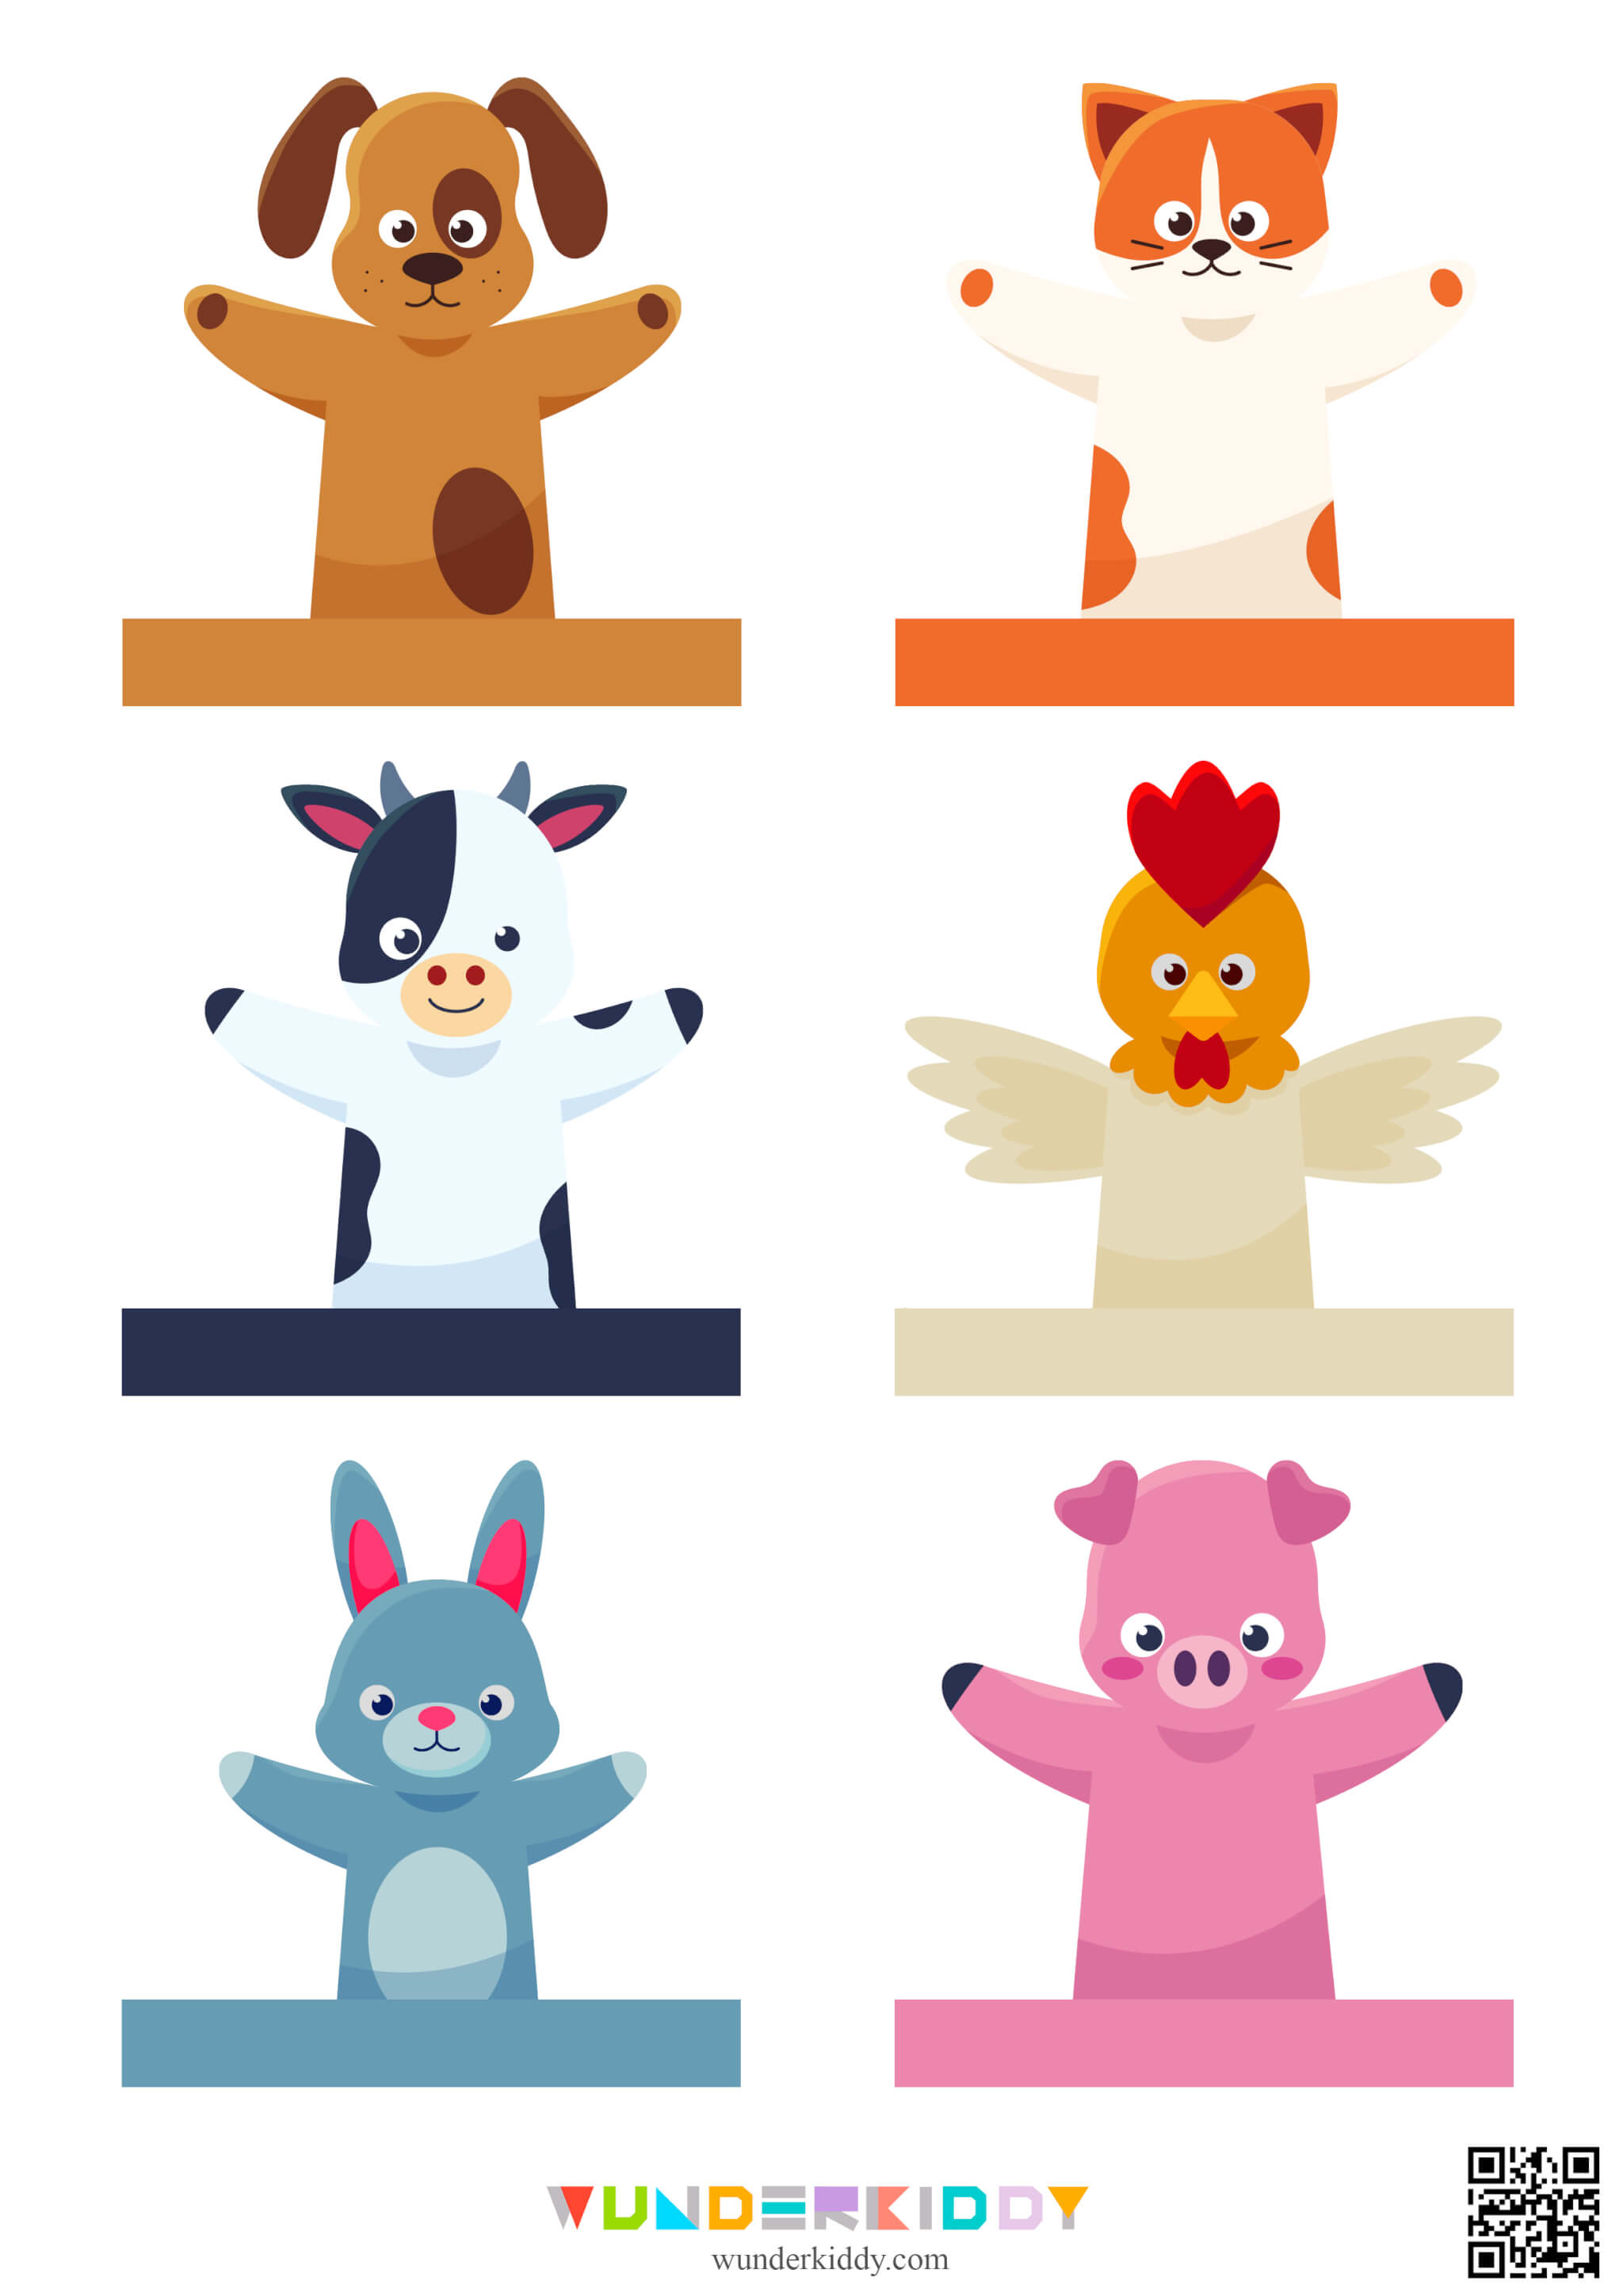 Templates of Animal Finger Puppets for Toddlers - Image 4